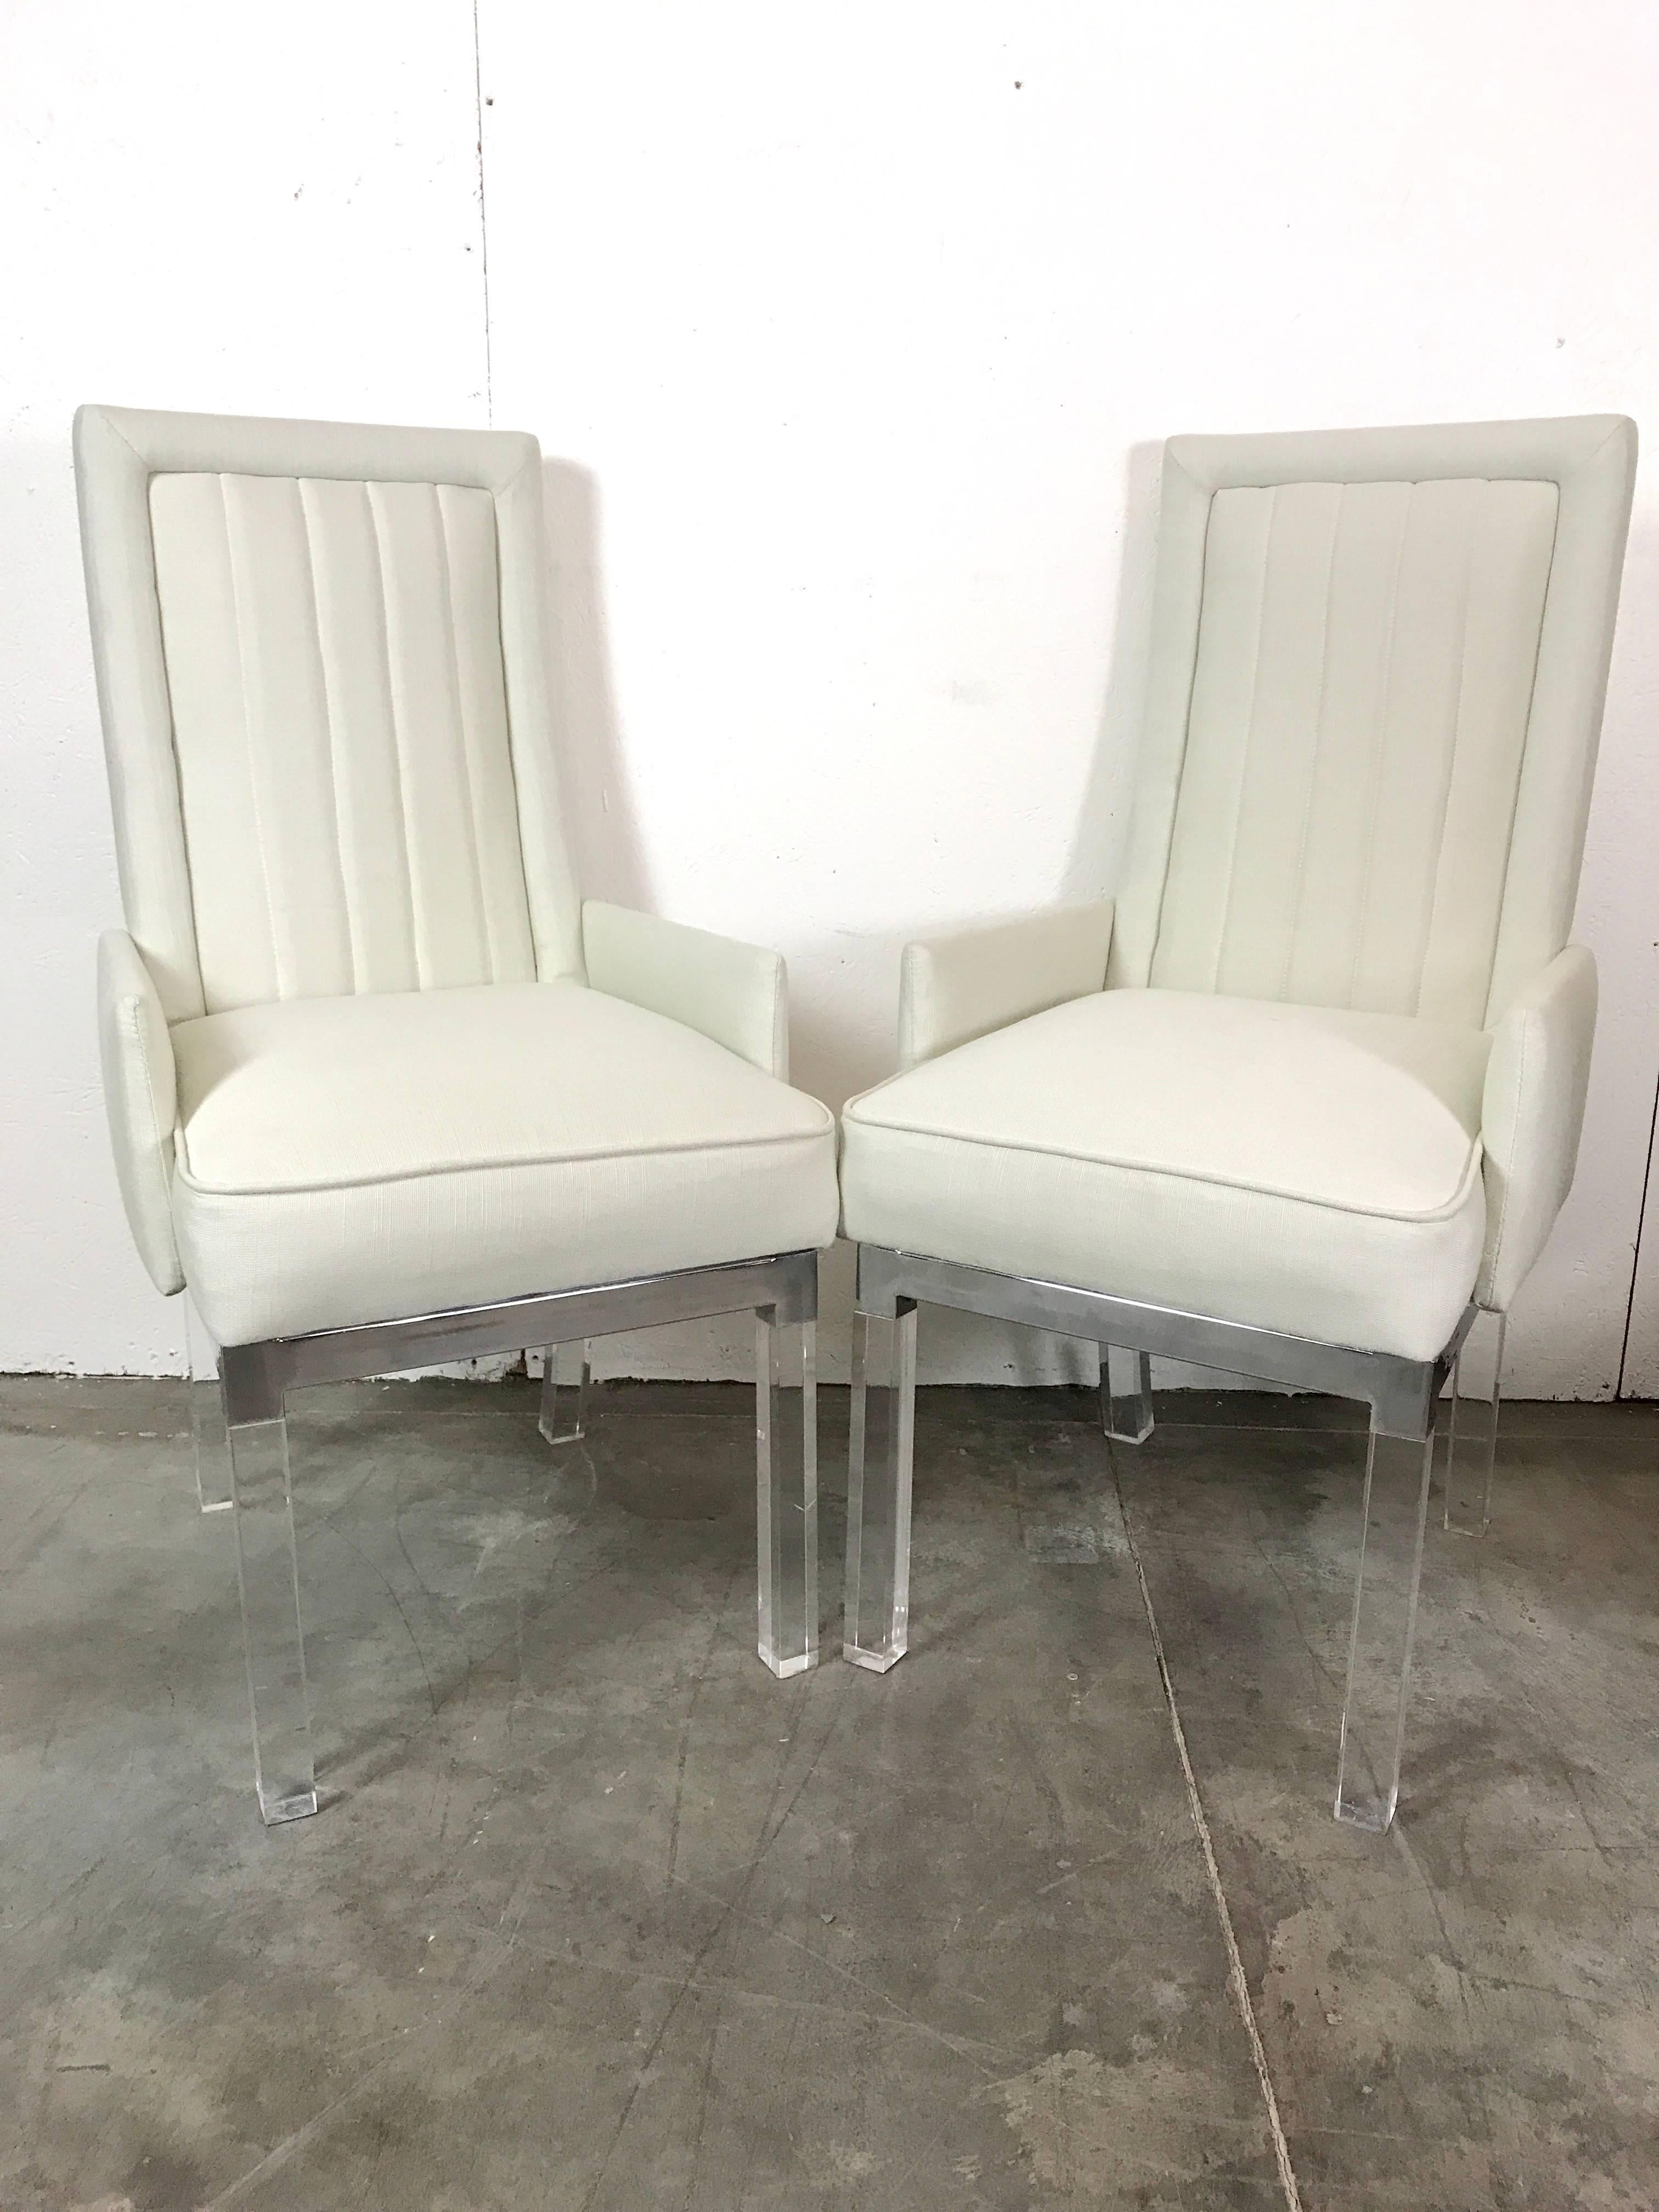 Six Charles Hollis Jones Lucite dining chairs, consisting of two armchairs and four side chairs, newly upholstered 
Armchairs measure 40